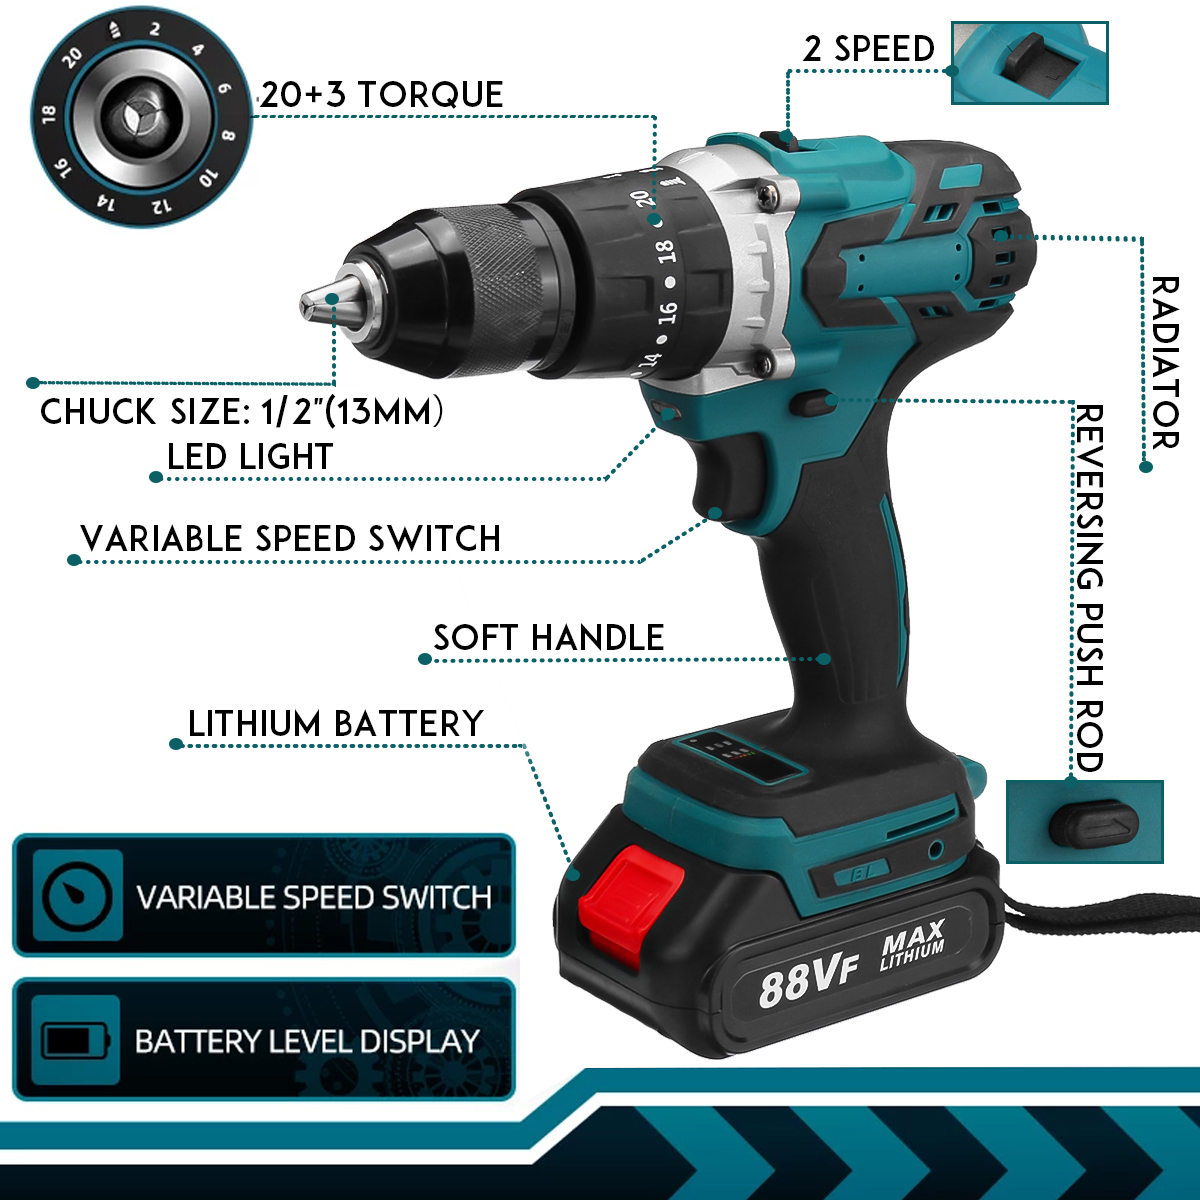 88VF-3-IN-1-Cordless-Brushless-Drill-Electric-Screwdriver-Hammer-Impact-Drill-203-Torque-W-12pcs-Bat-1854945-3